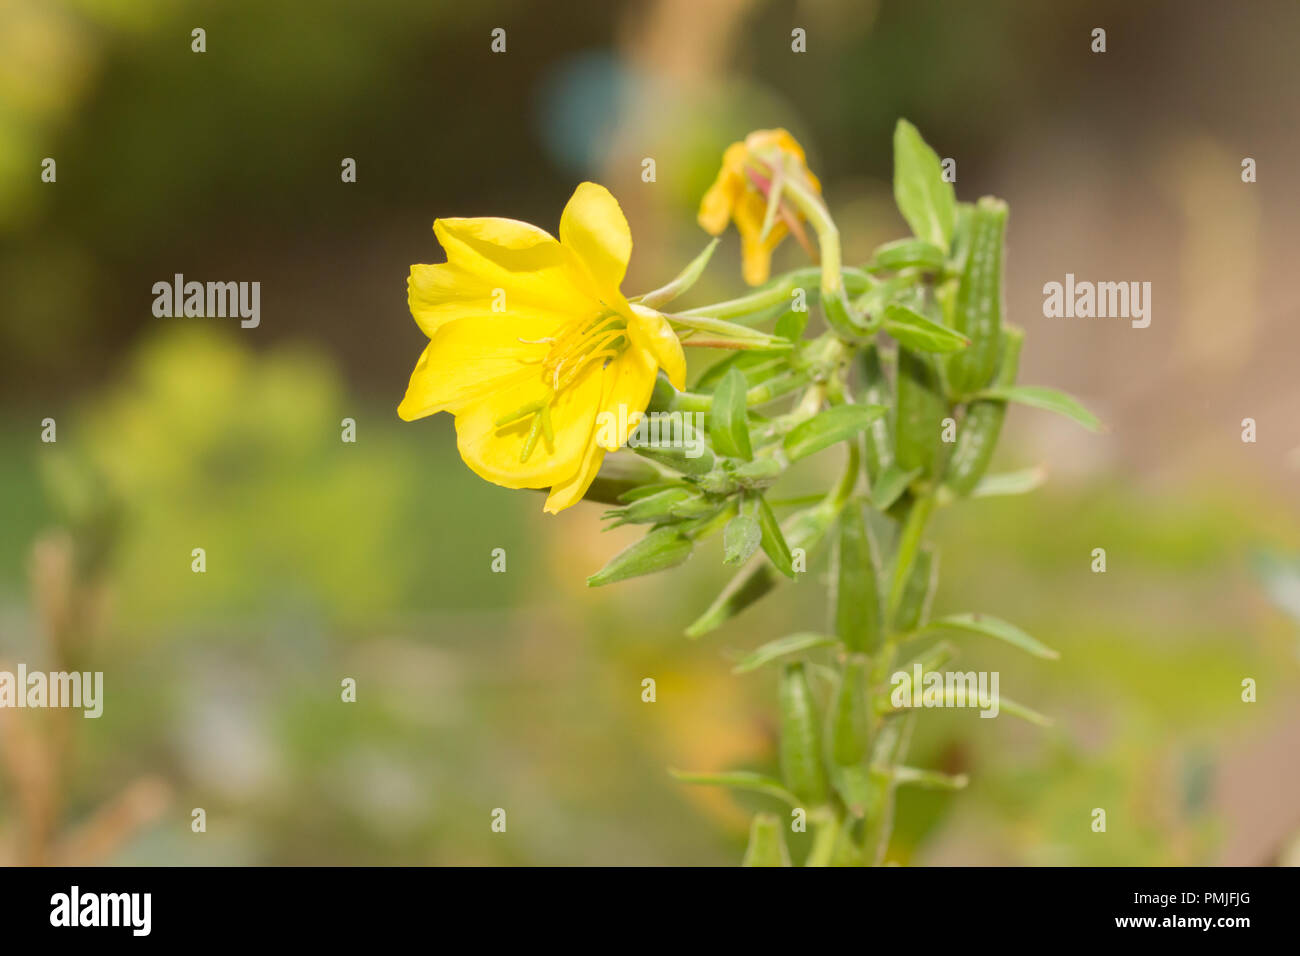 Oenothera biennis, commonly known as  evening primrose, evening star and sun drop. An important plant used in medicine world wide. Stock Photo